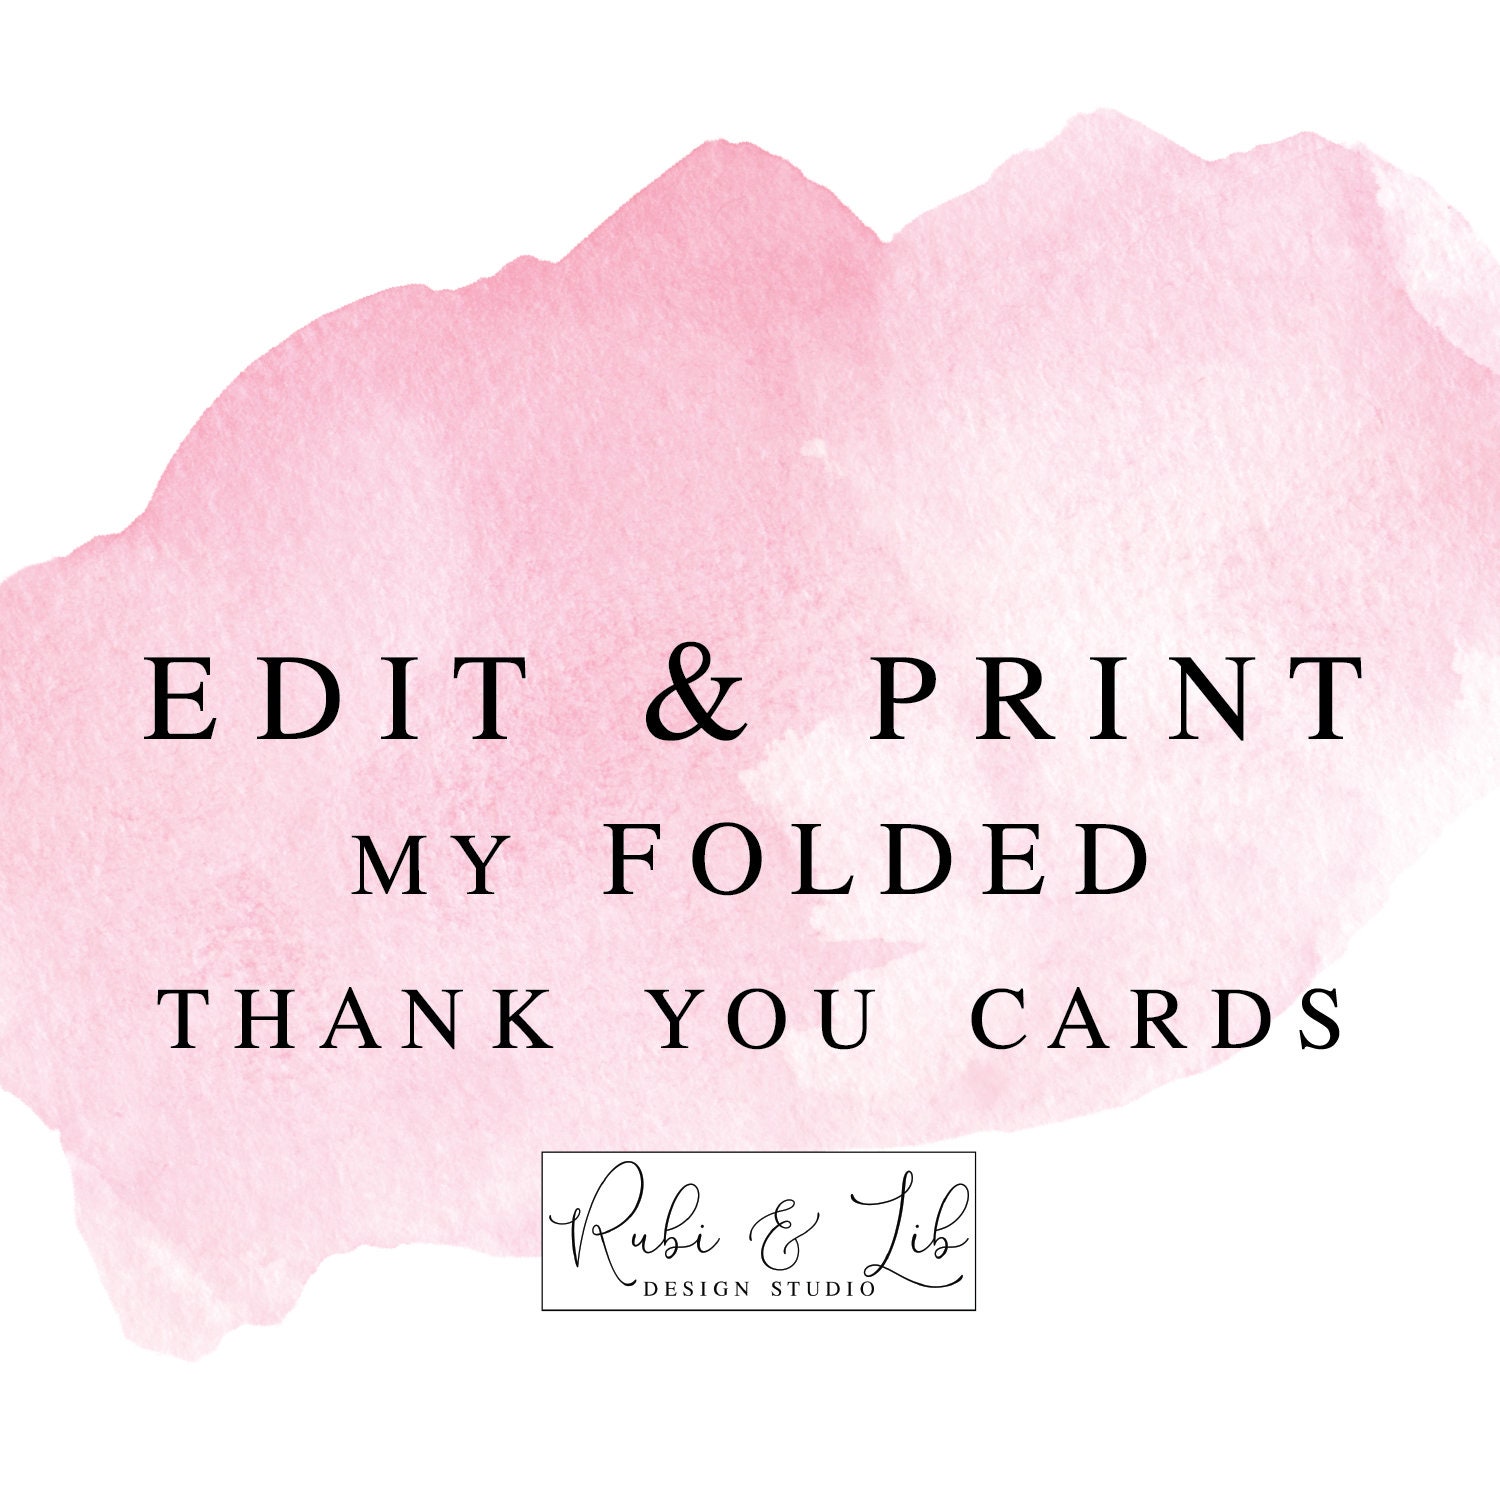 Print My Folded Thank You Card, Customize Card For Me, Printing Service, Cards